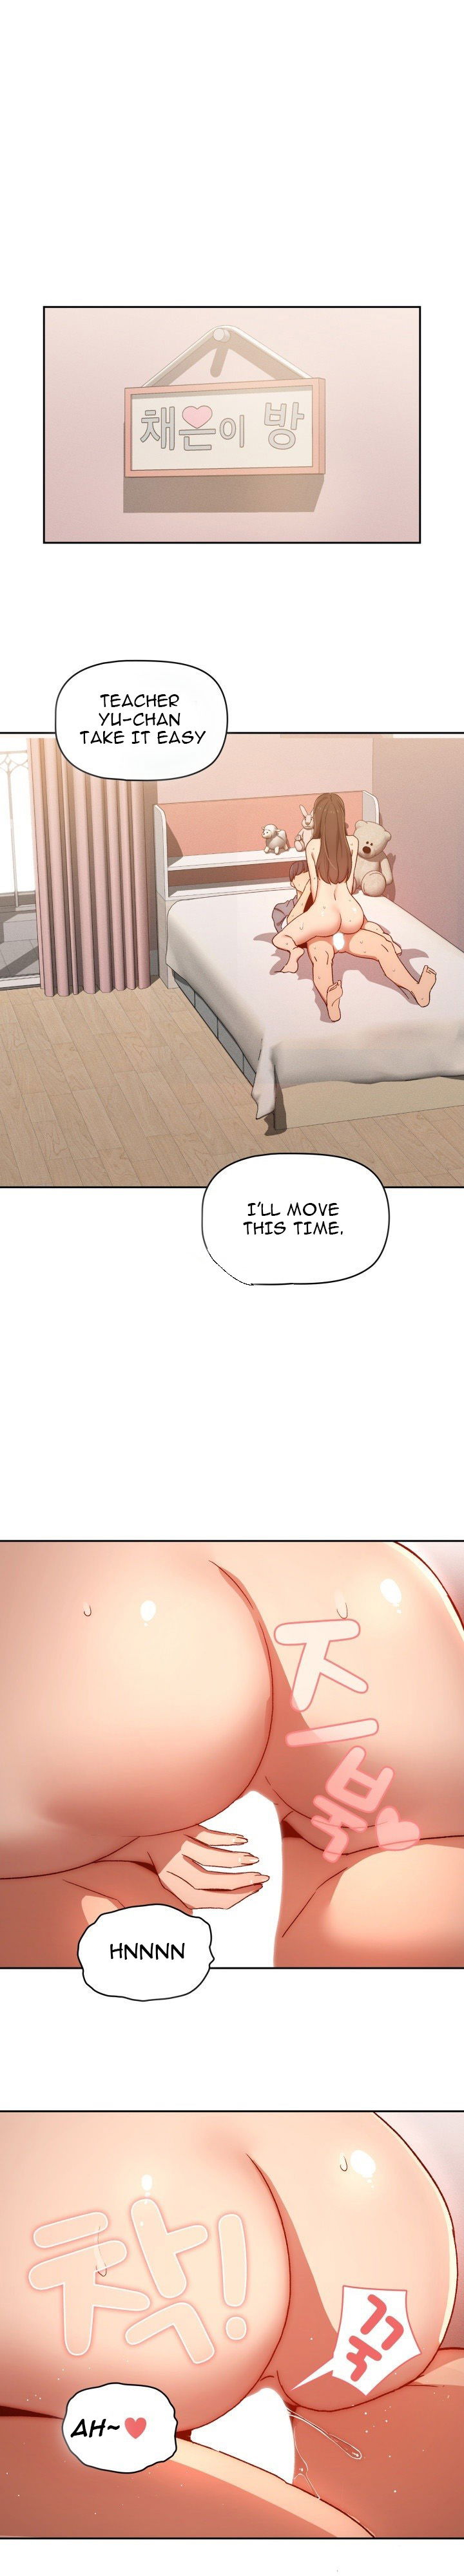 private-tutoring-in-these-difficult-times-chap-31-0